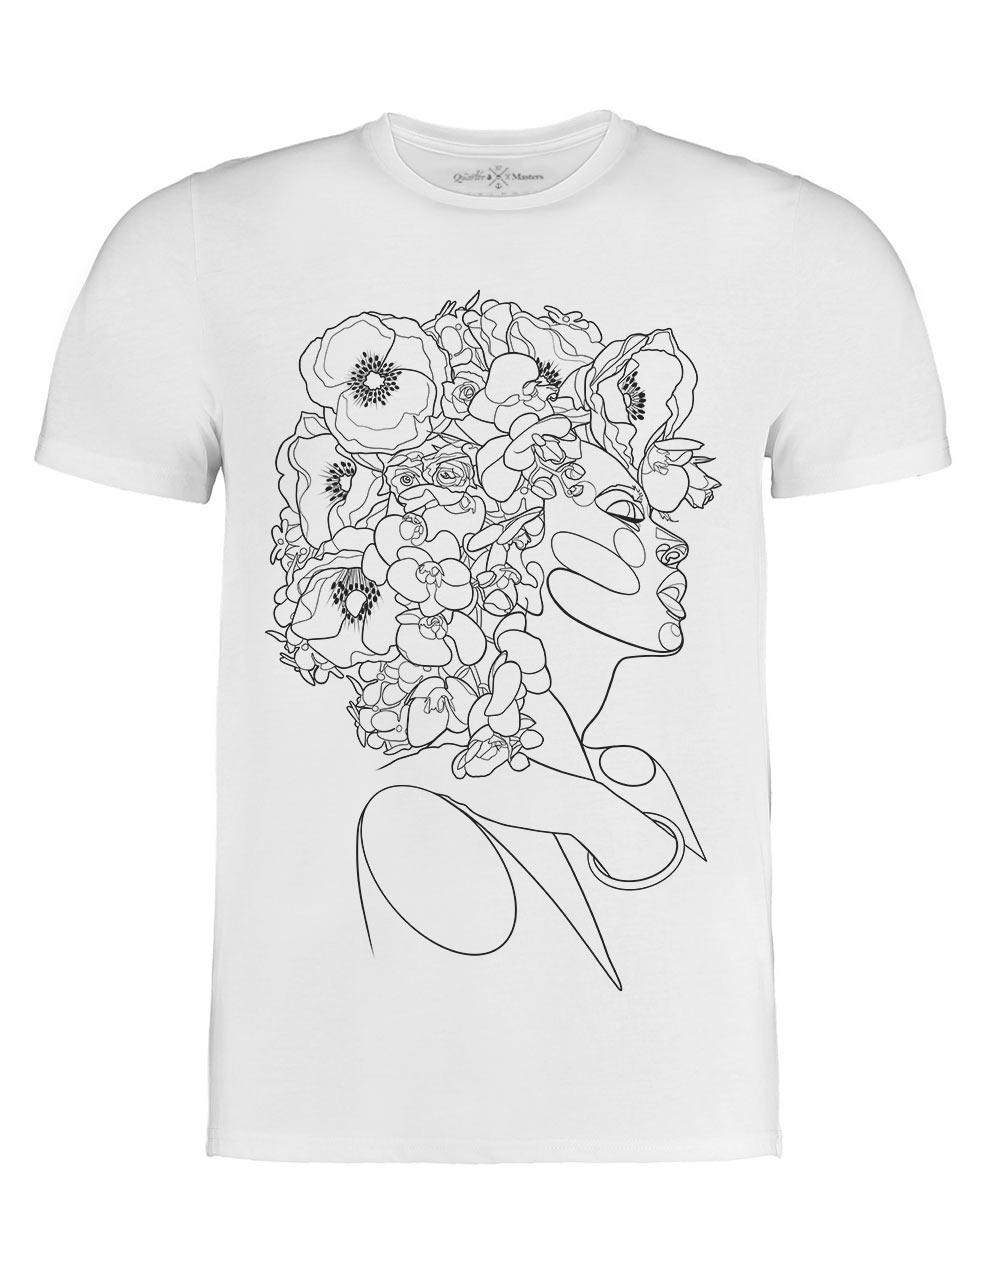 Primrose T-shirt by Lucy Coward-Whittaker